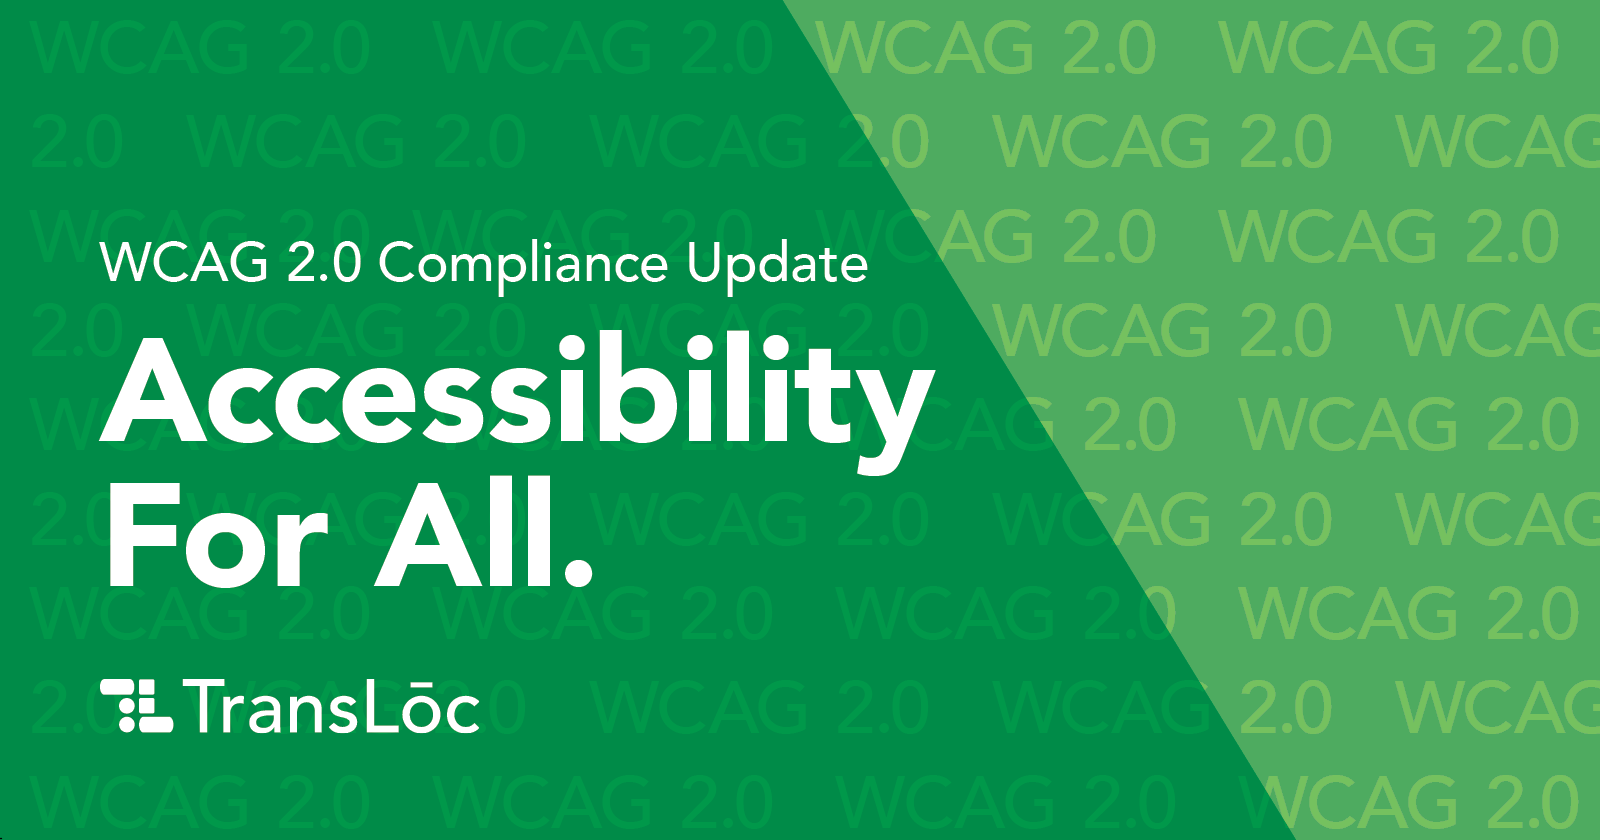 WCAG 2.0 Compliance Update: Accessibility for All